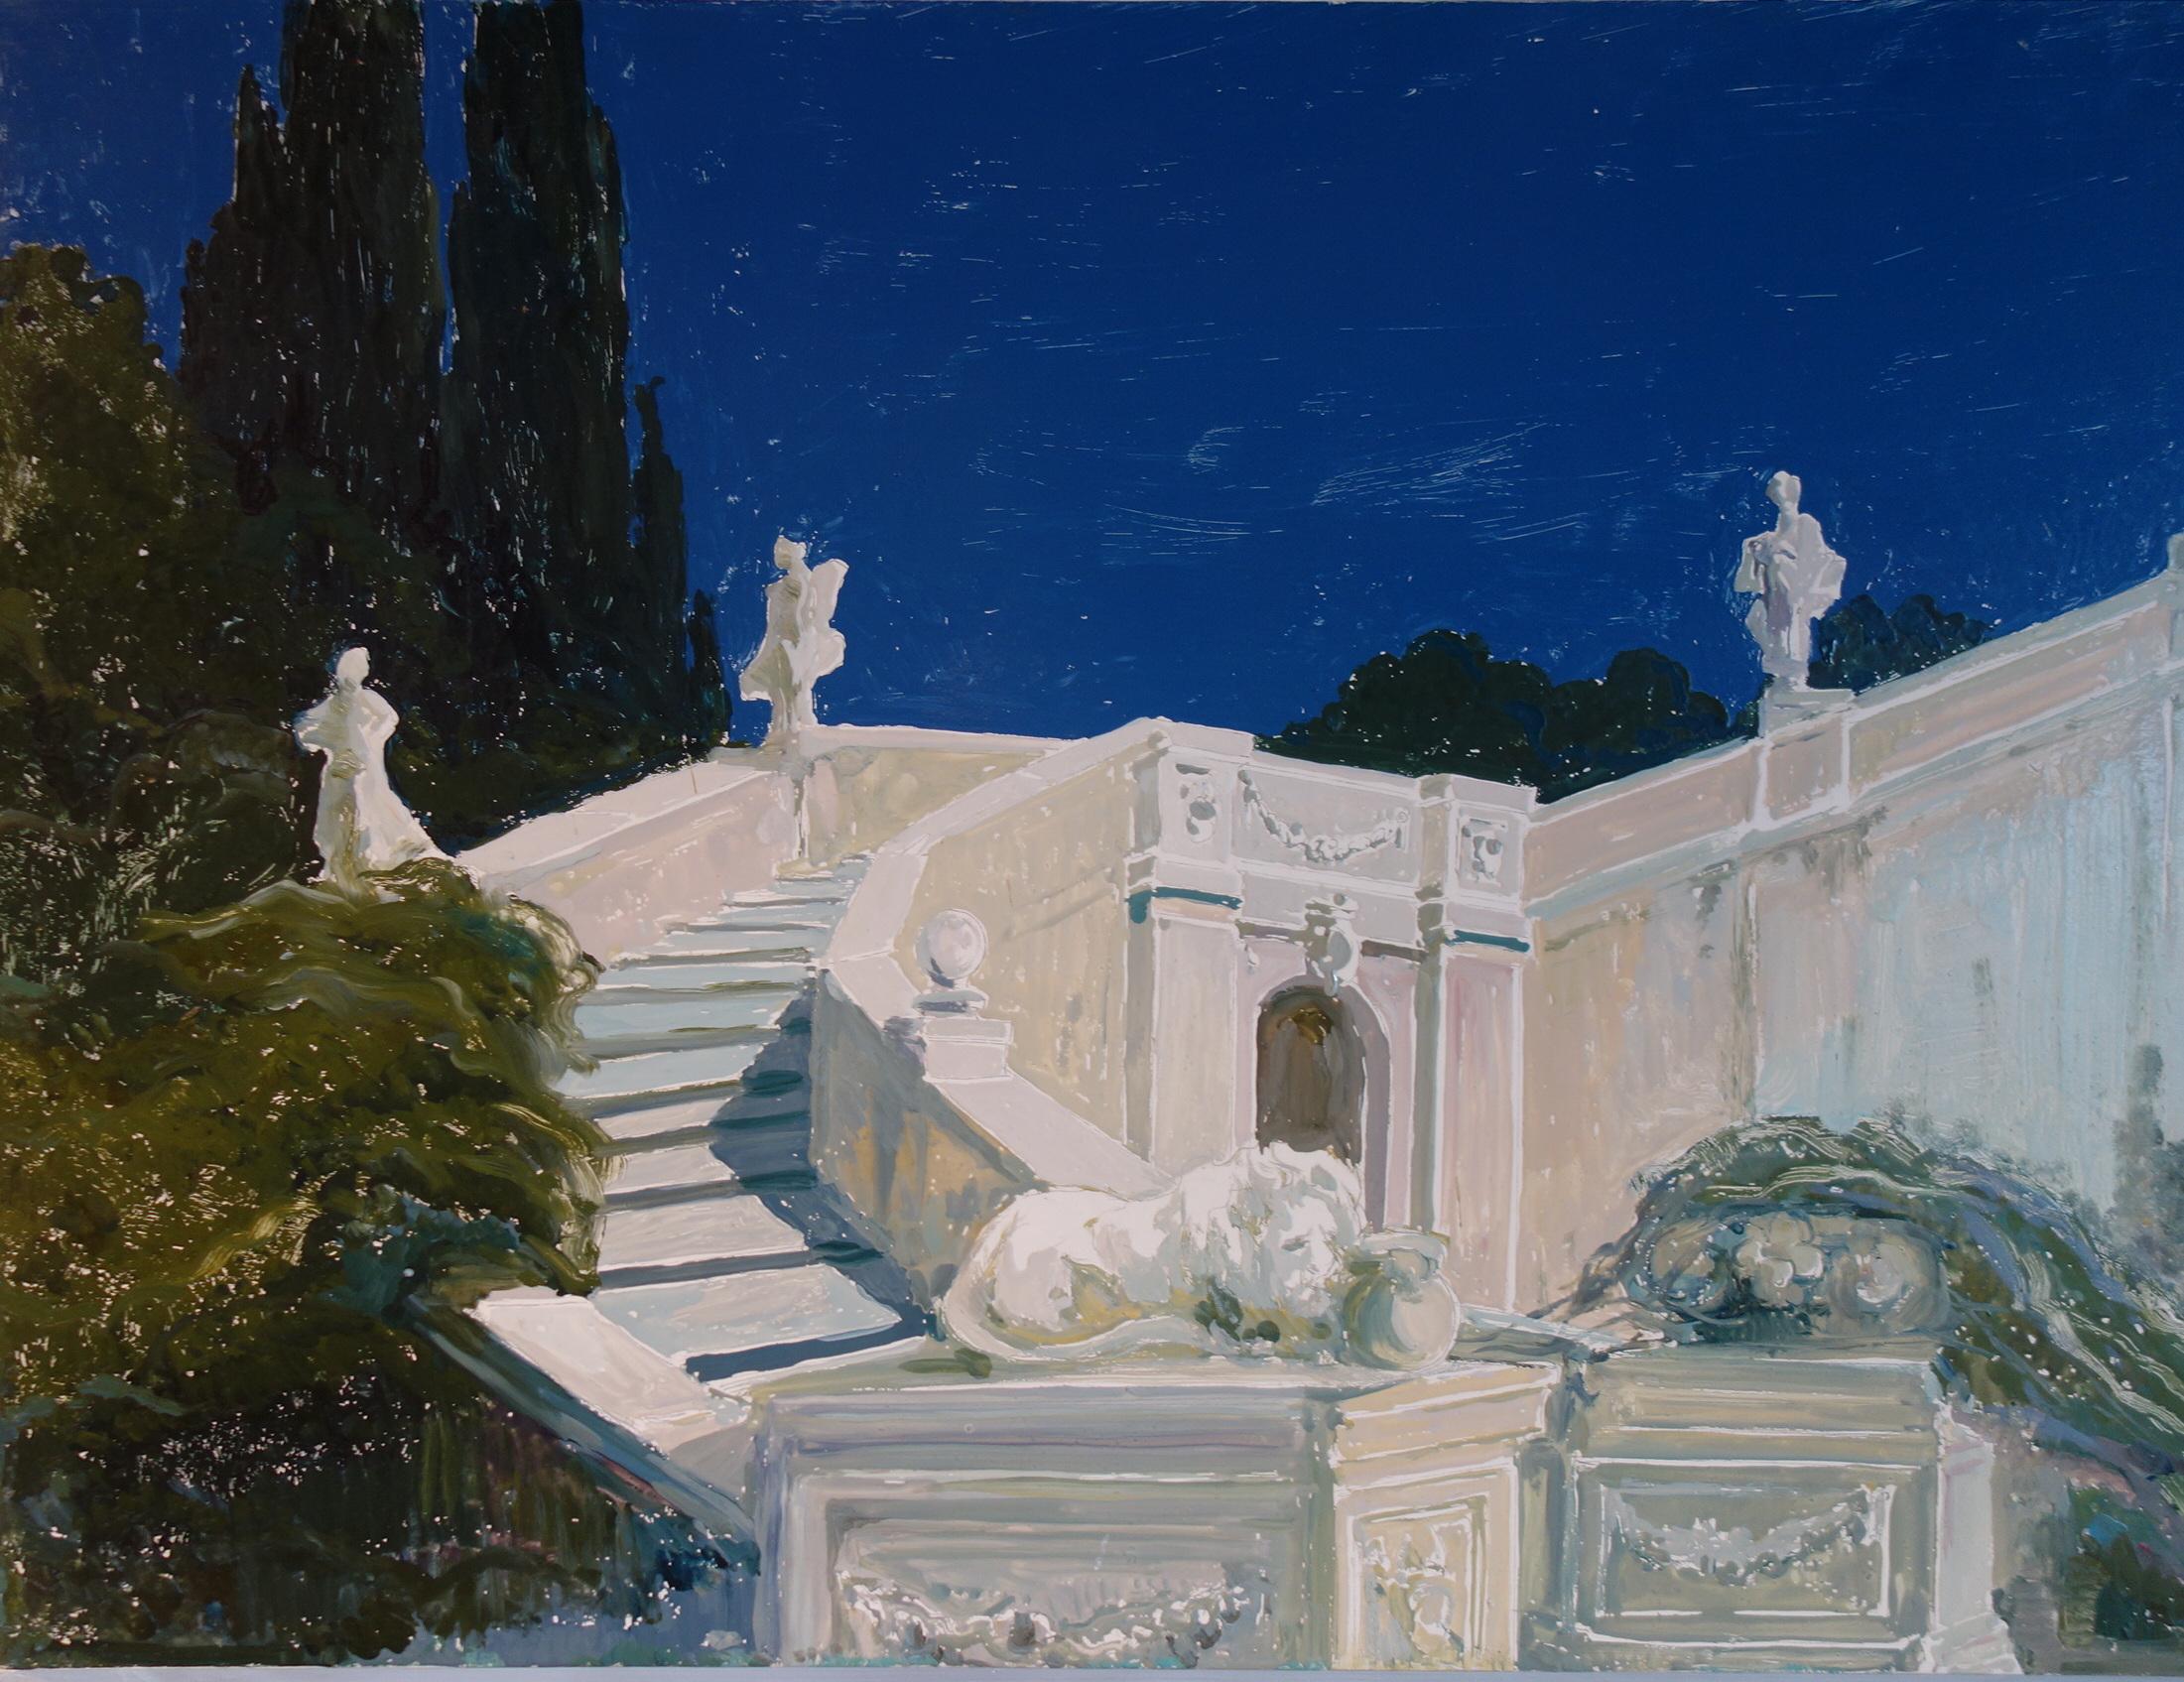 One of Six fun vintage study for an Italian Classic garden stairs with lions and fountain. Probably some scenography preparation. Really pleasant scenery and nice vivid color on the blue and white scale, circa 1960.